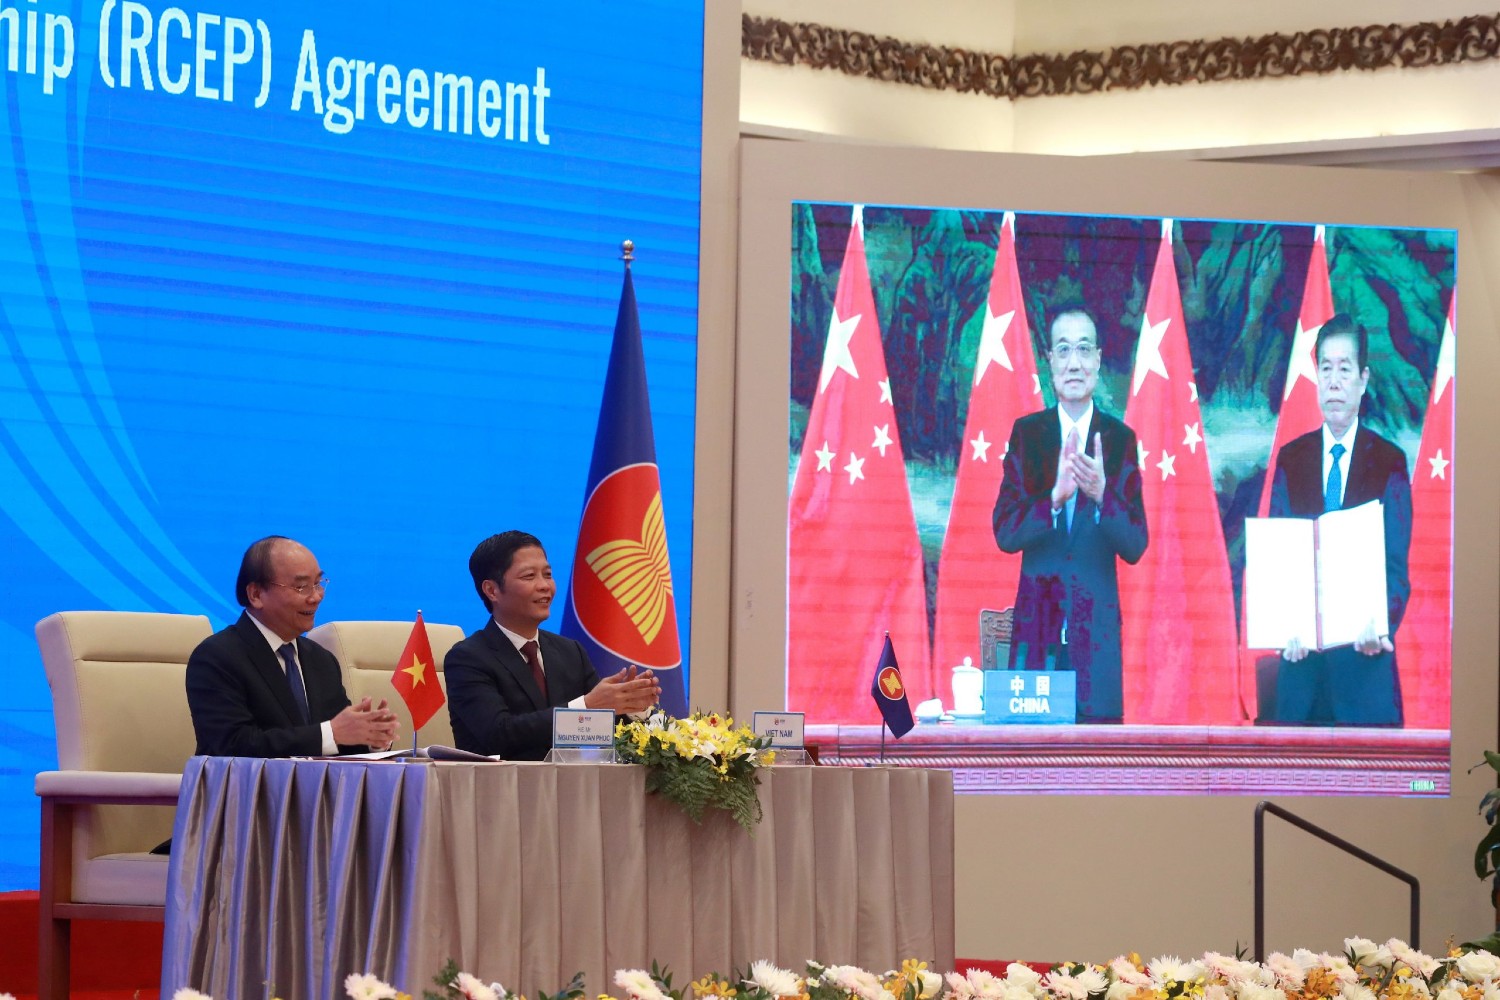 Vietnamese Prime Minister Nguyen Xuan Phuc, left, and Minister of Trade Tran Tuan Anh, right, applaud next to a screen showing Chinese Premier Li Keqiang and Minister of Commerce Zhong Shan holding up signed RCEP agreement, in Hanoi, Veitnam. China and 14 other countries have agreed to set up the world's largest trading bloc, encompassing nearly a third of all economic activity, in a deal many in Asia are hoping will help hasten a recovery from the shocks of the pandemic. (AP Photo/Hau Dinh)